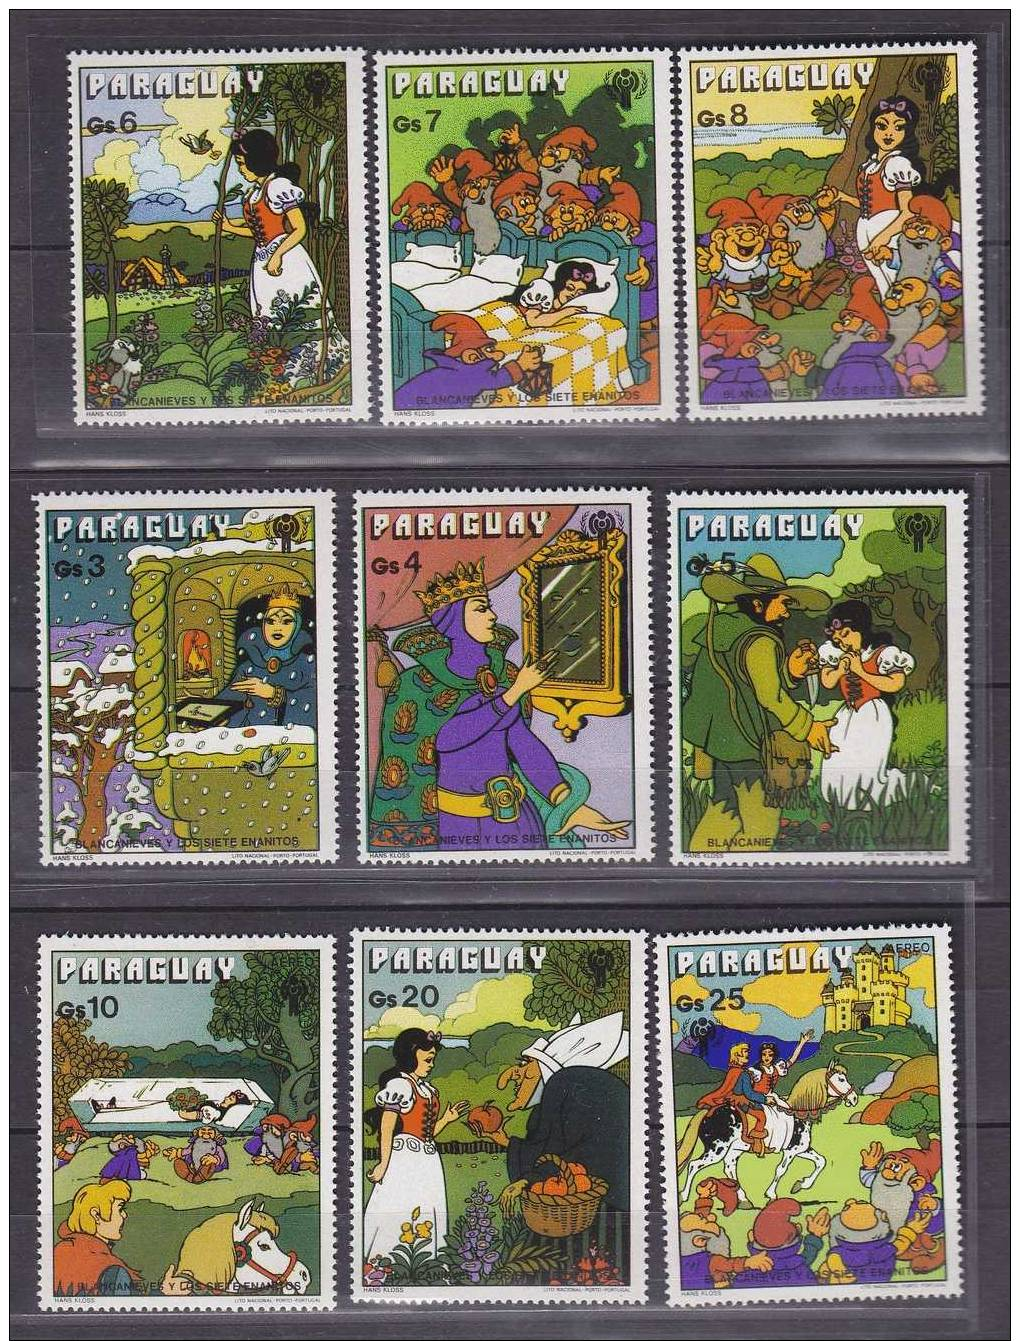 PARAGUAY 1978  MI 3112/3120  **MNH   IYC   UN NU VN International Year Of The Child - Paraguay